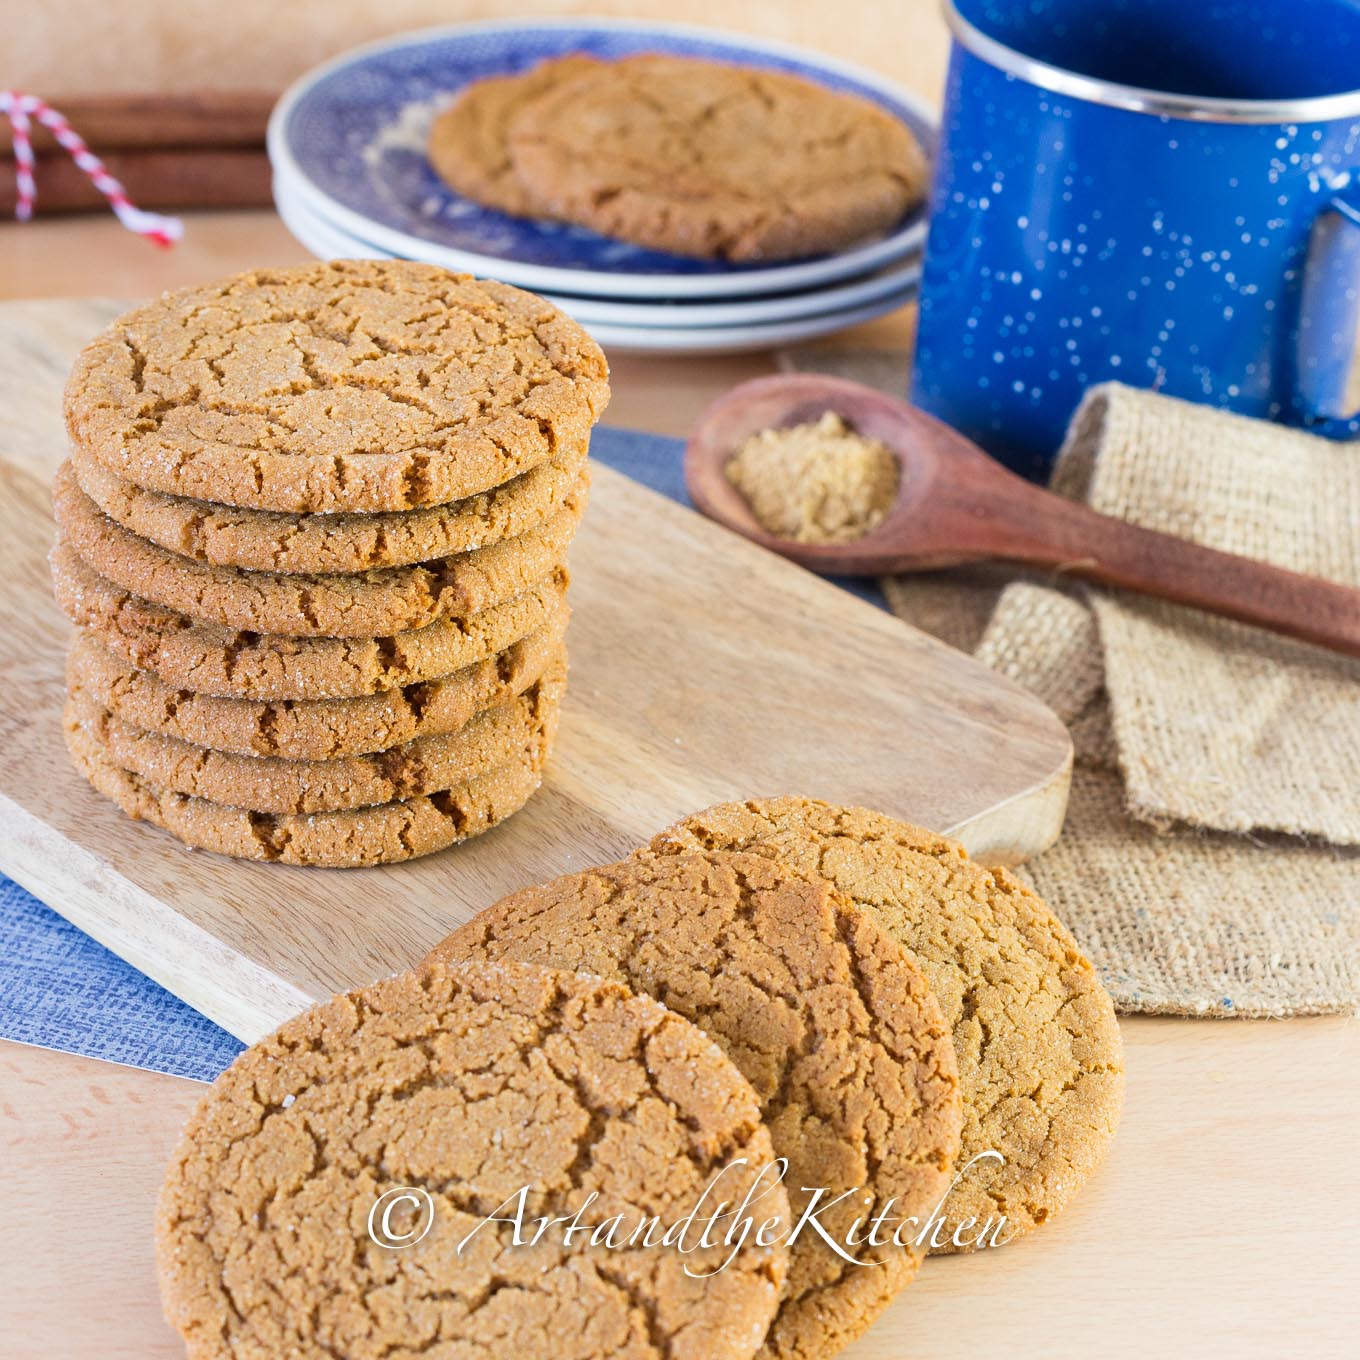 Ginger cookies on wood board with blue coffee mug and dishes.